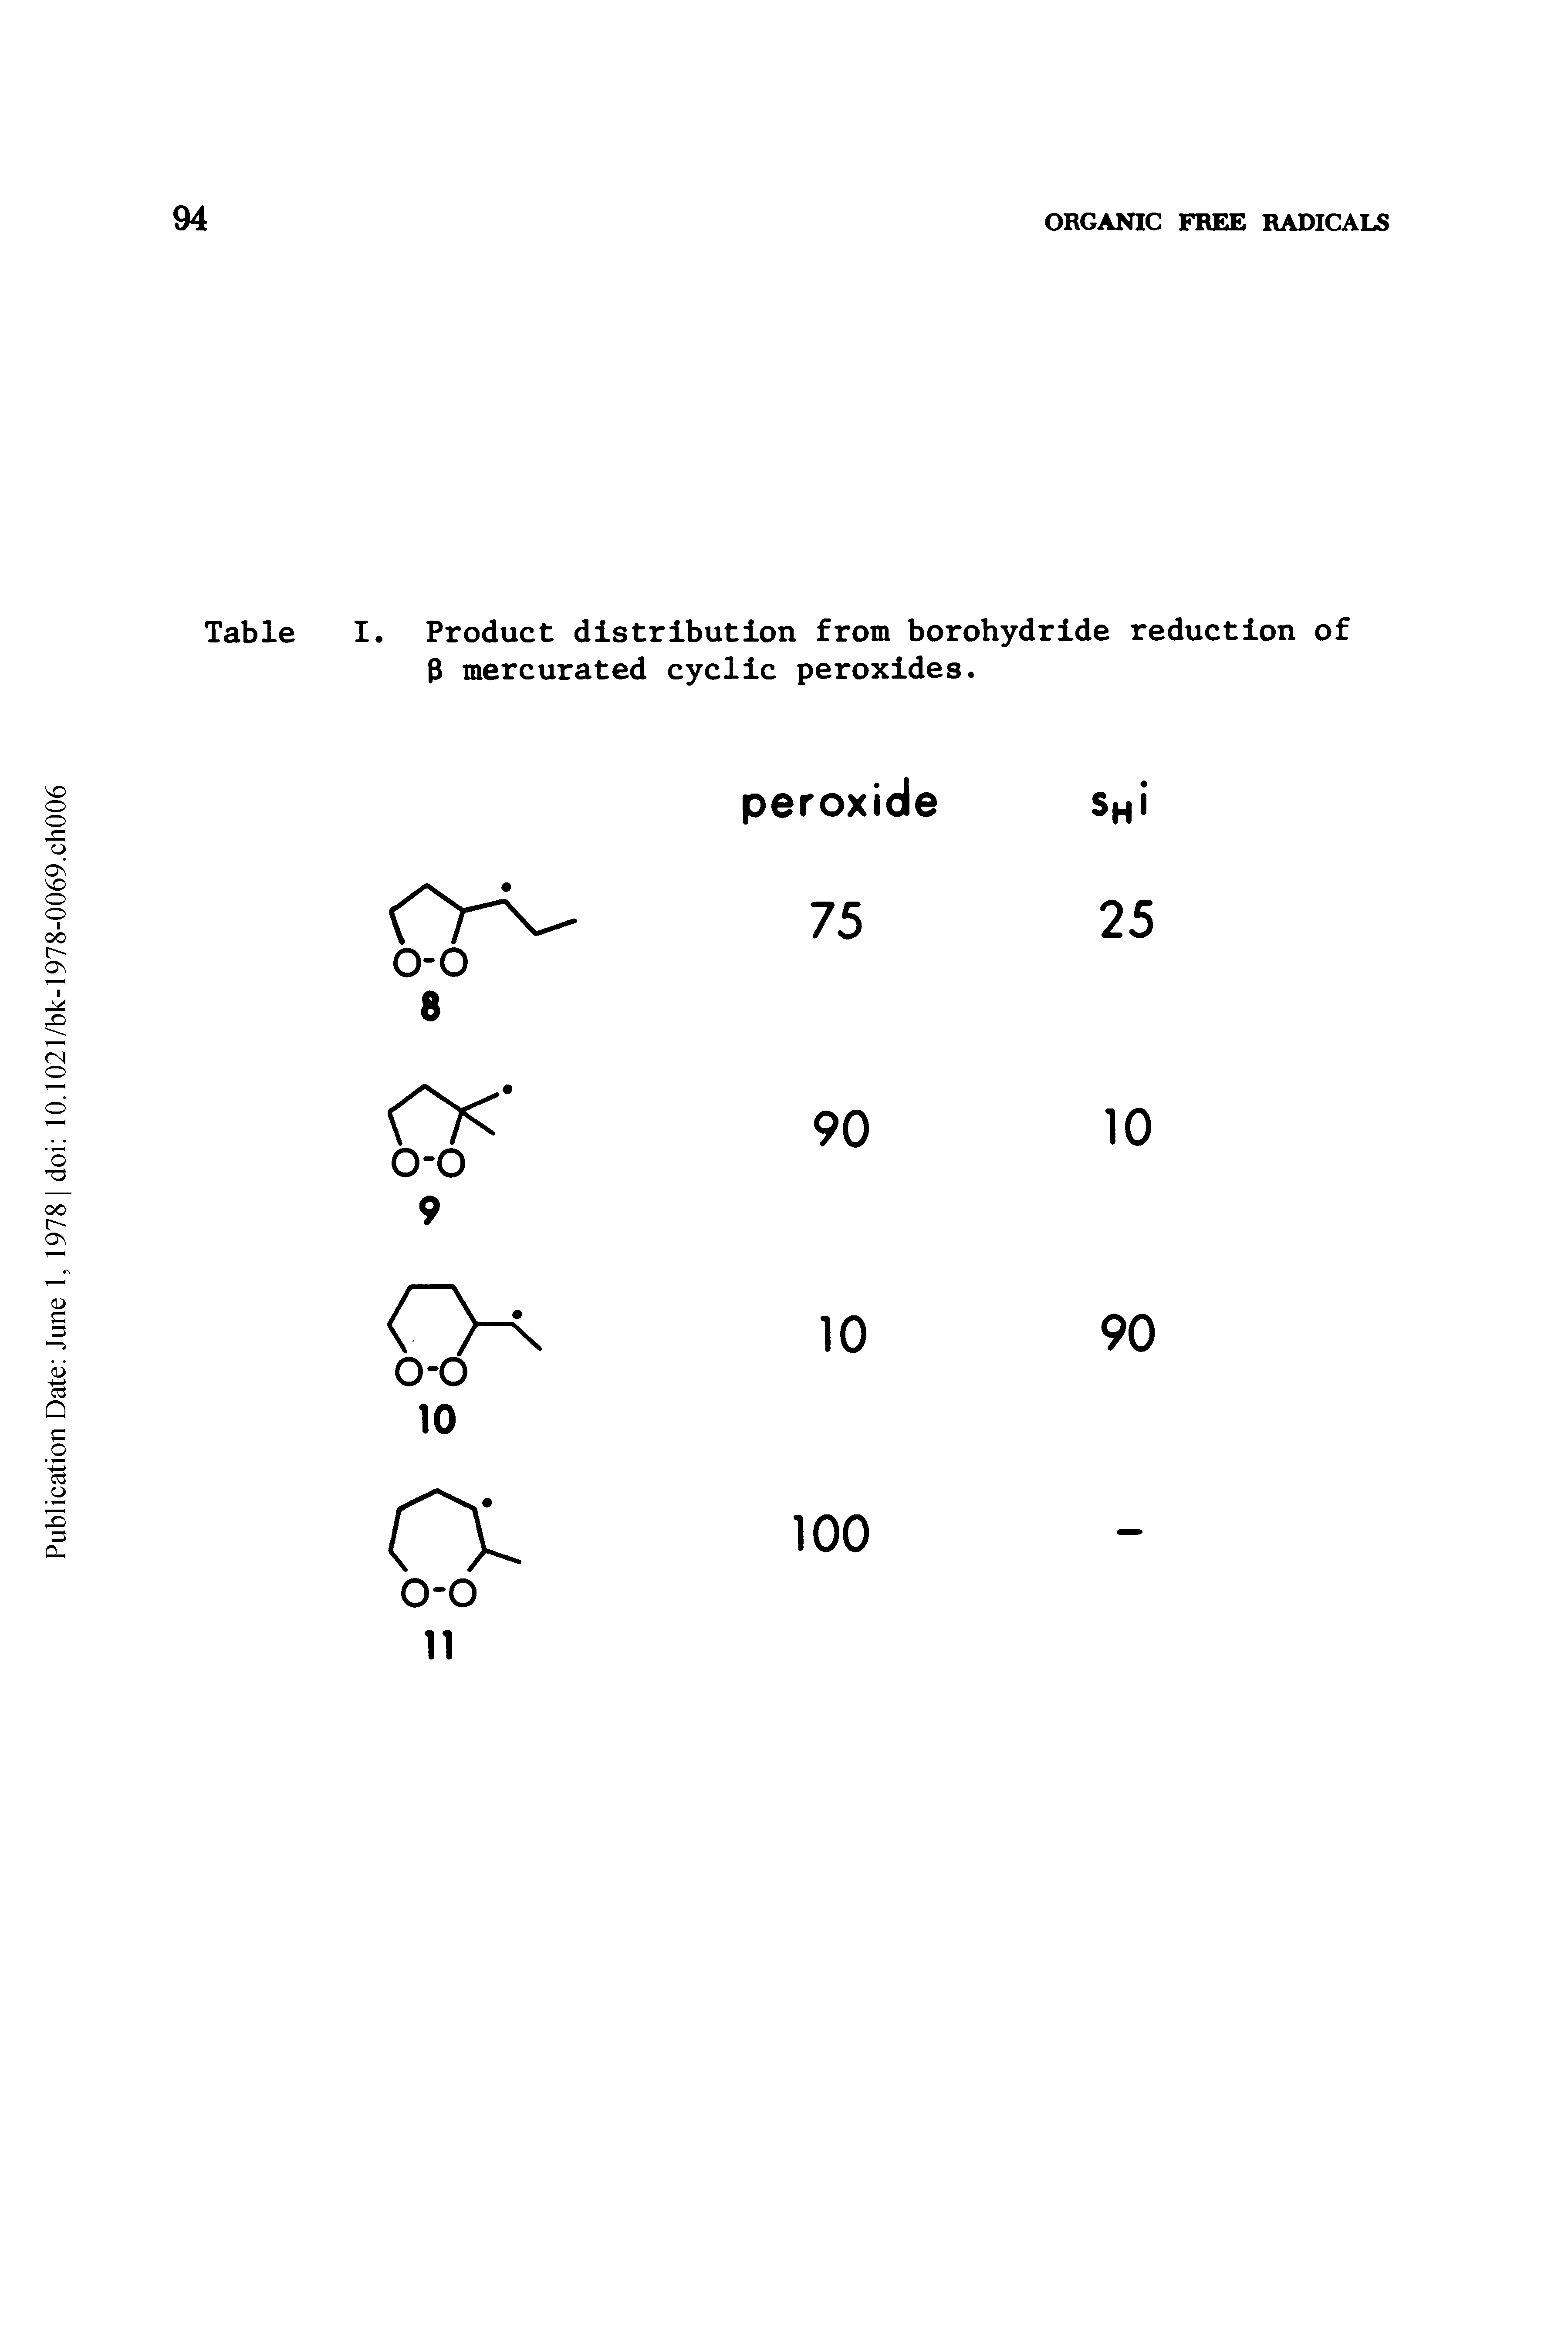 Table I. Product distribution from borohydride reduction of 3 mercurated cyclic peroxides.